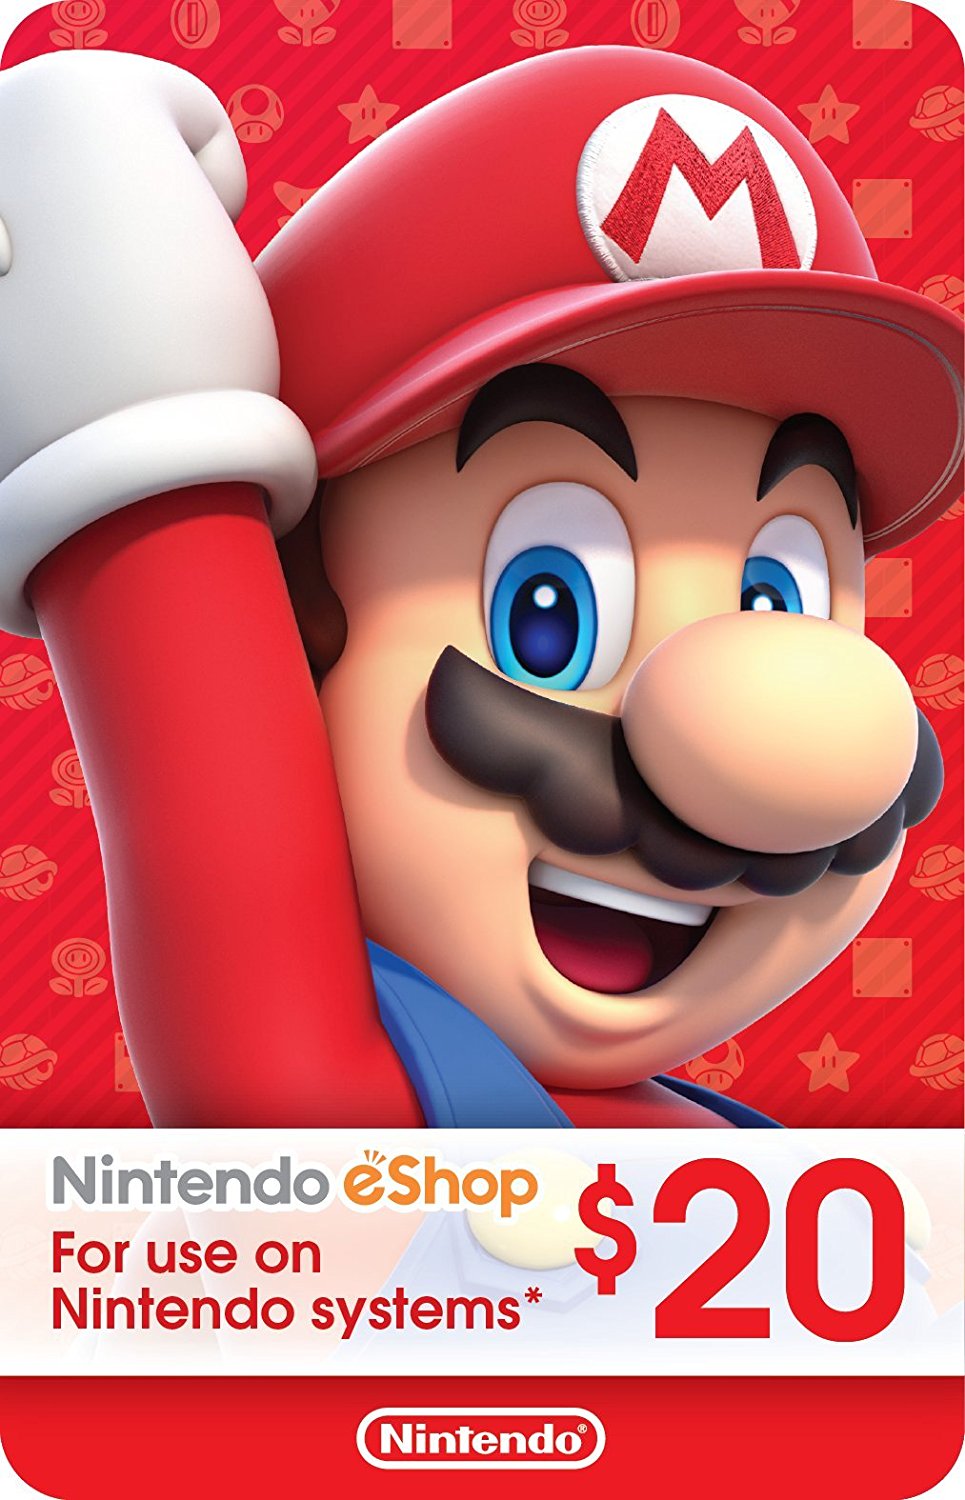 can you buy nintendo online with eshop cards